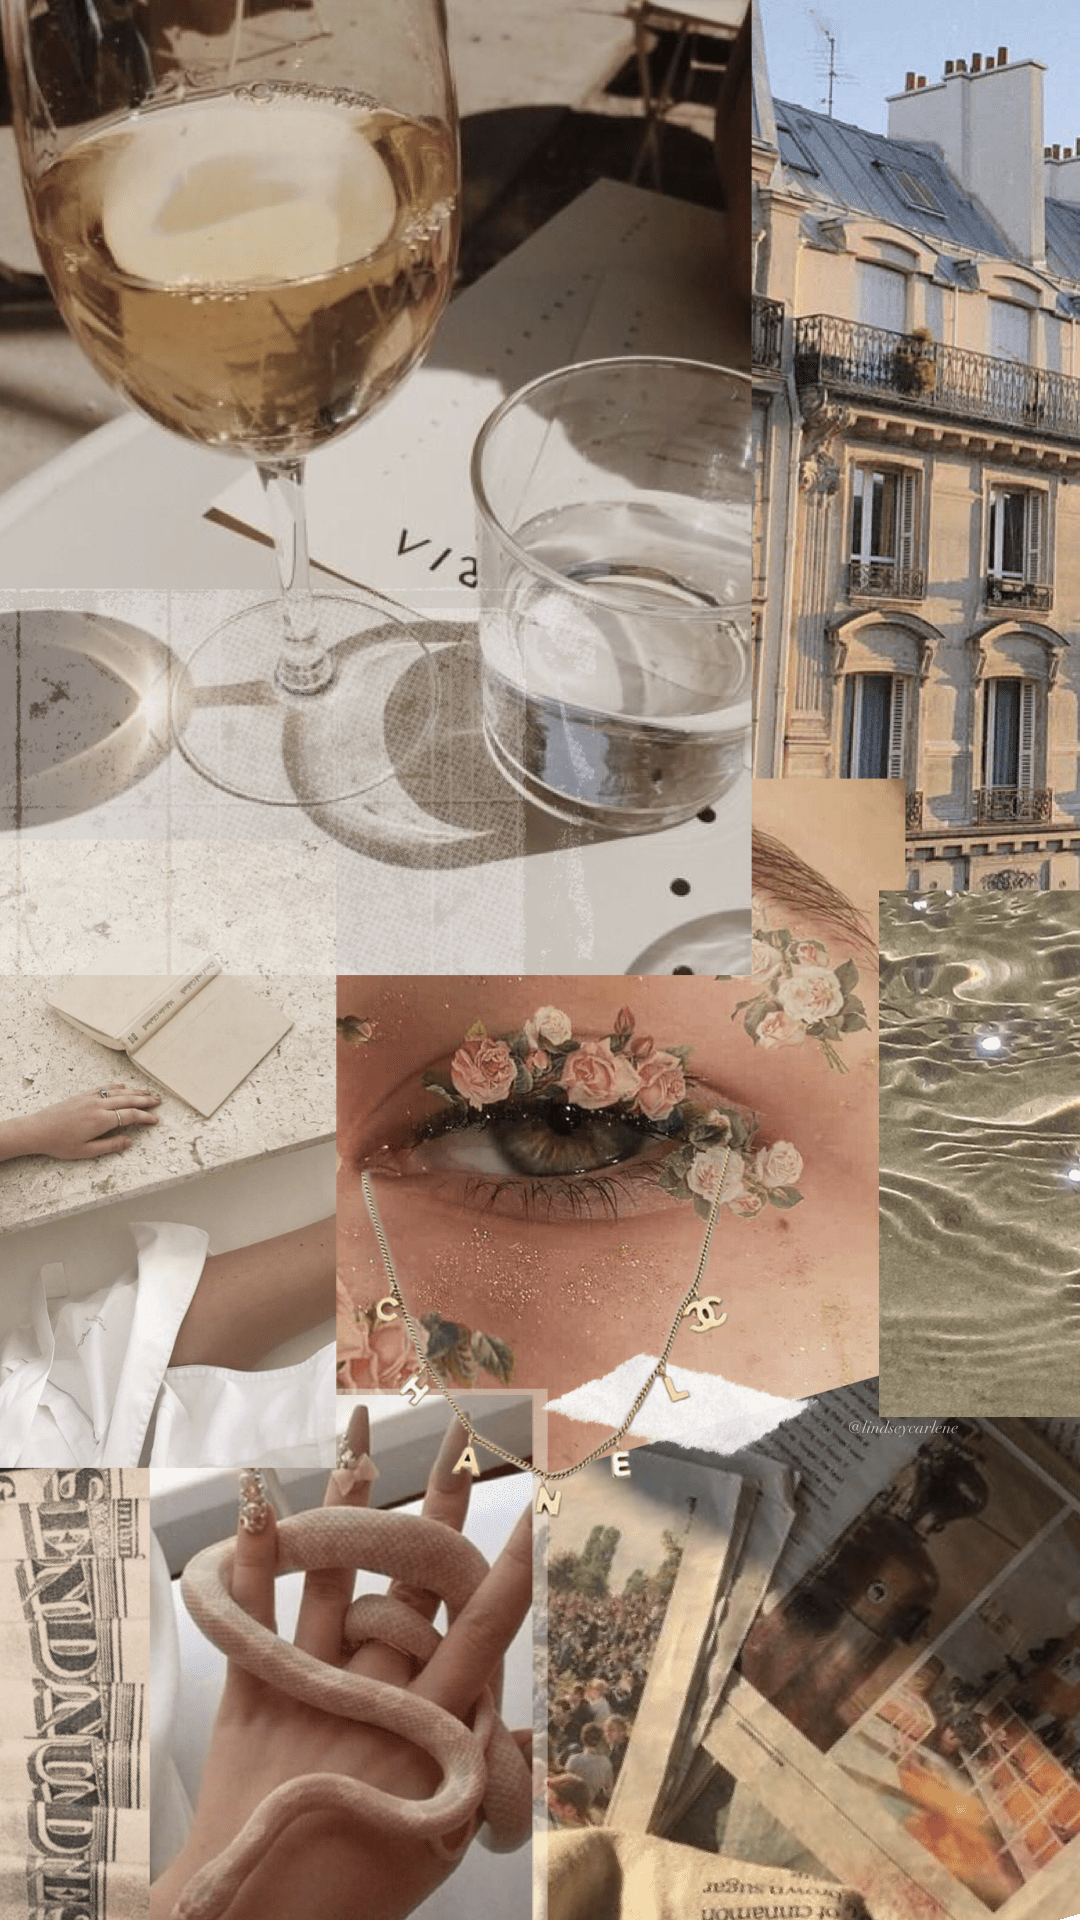 A collage of images including a wine glass, a book, a snake, and a building. - Champagne